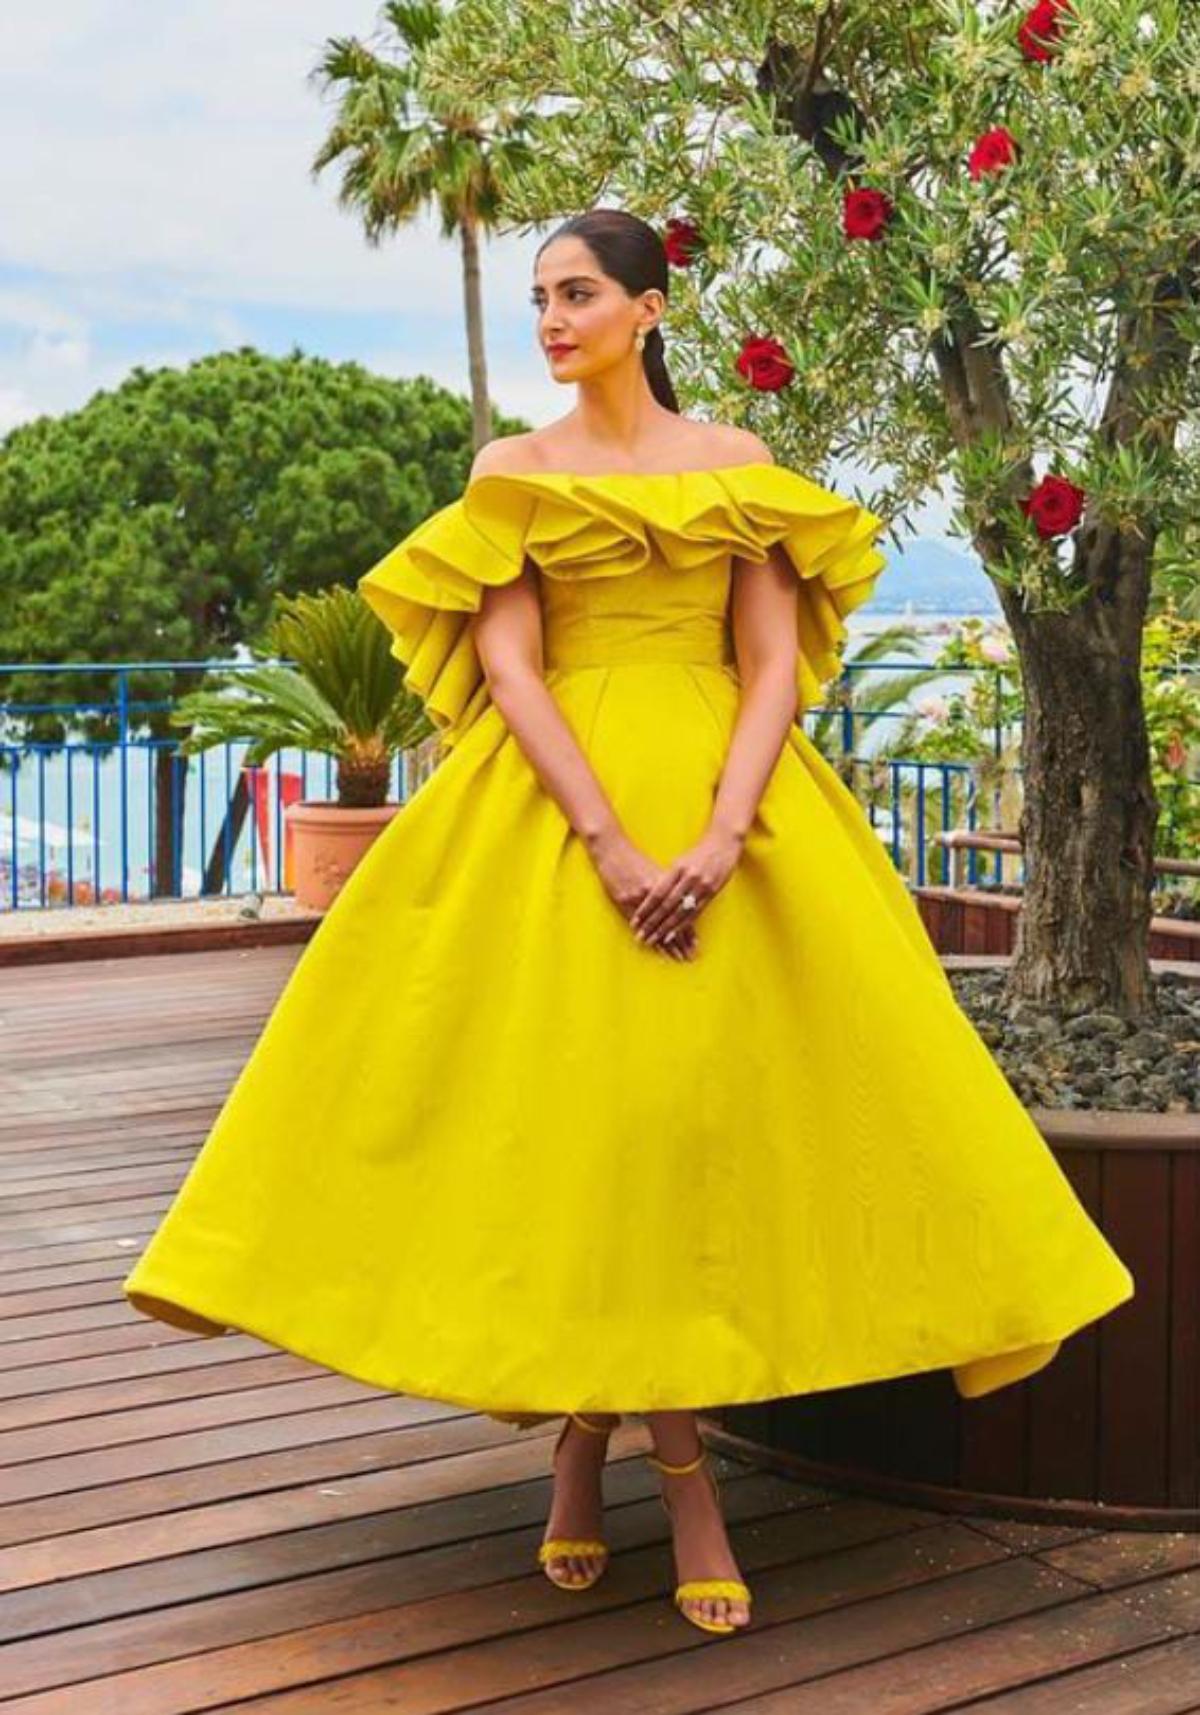 Shine bright: Bright colours alone might sometimes be enough to boost an outfit. While slaying this vivid yellow dress with ruffles, Sonam proves this in the true sense.